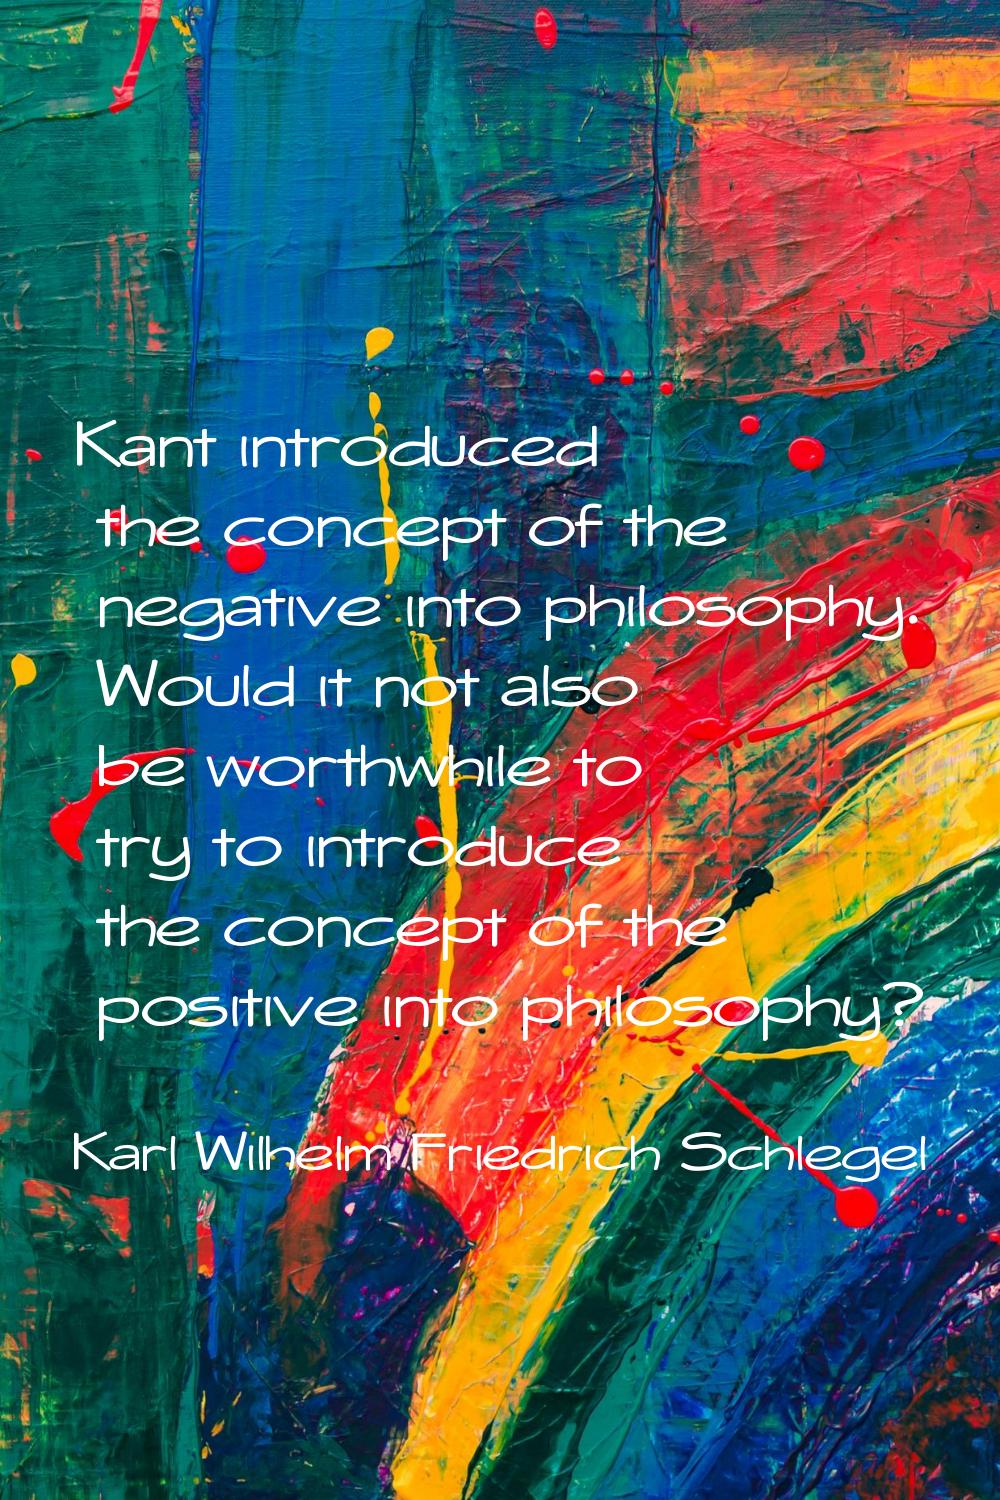 Kant introduced the concept of the negative into philosophy. Would it not also be worthwhile to try